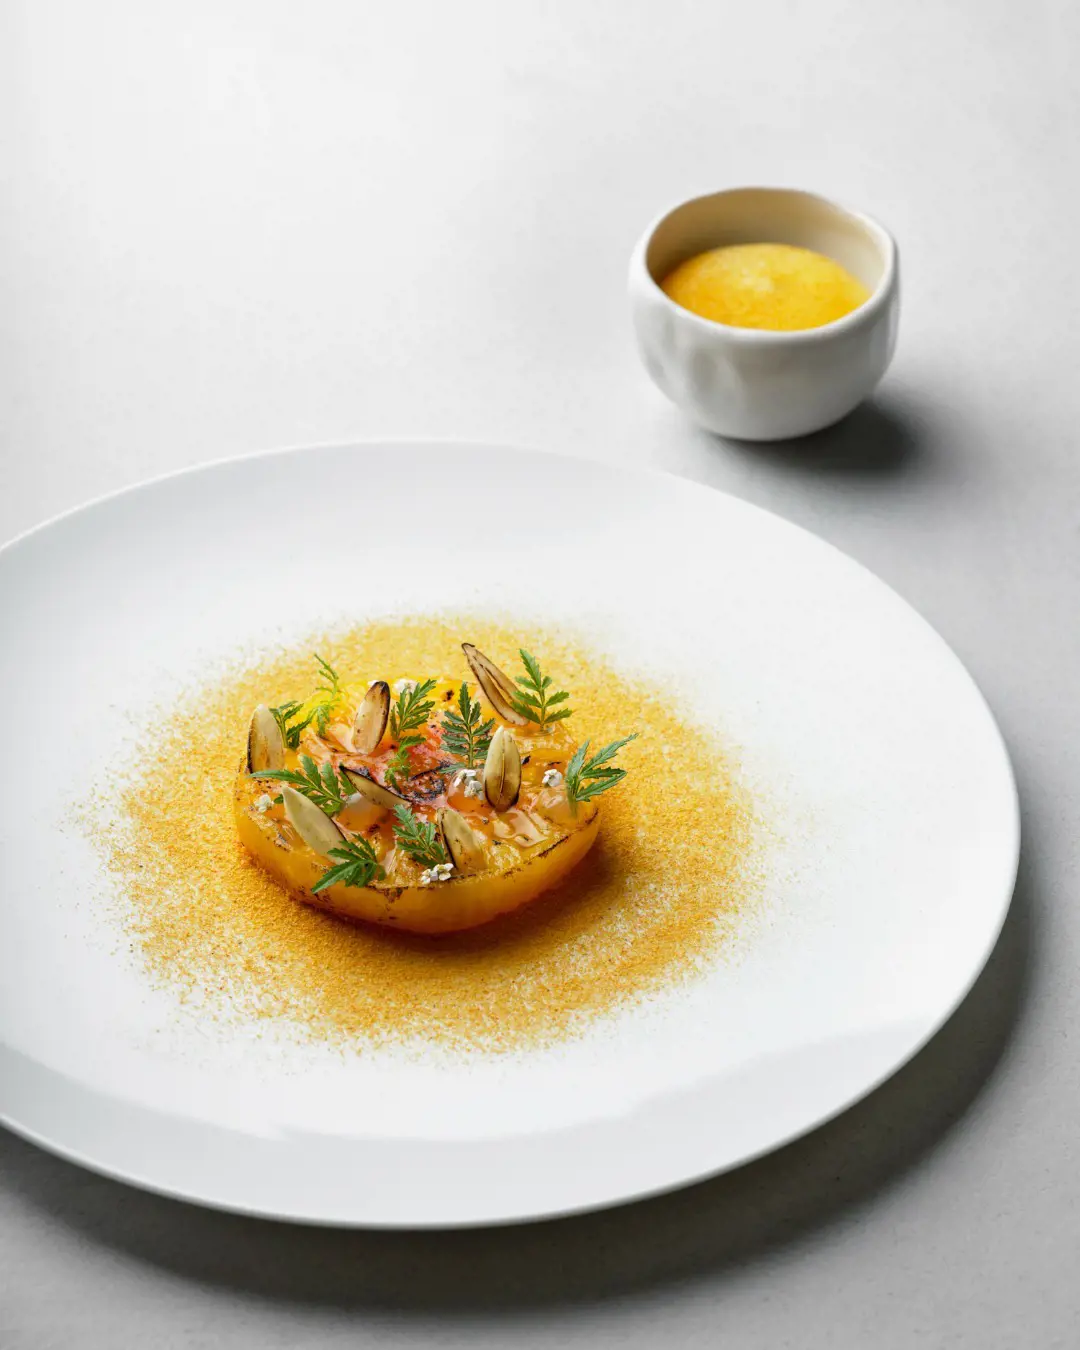 Heritage Tomato | Marinated with Nikka whisky, Tagette and mint ice cream